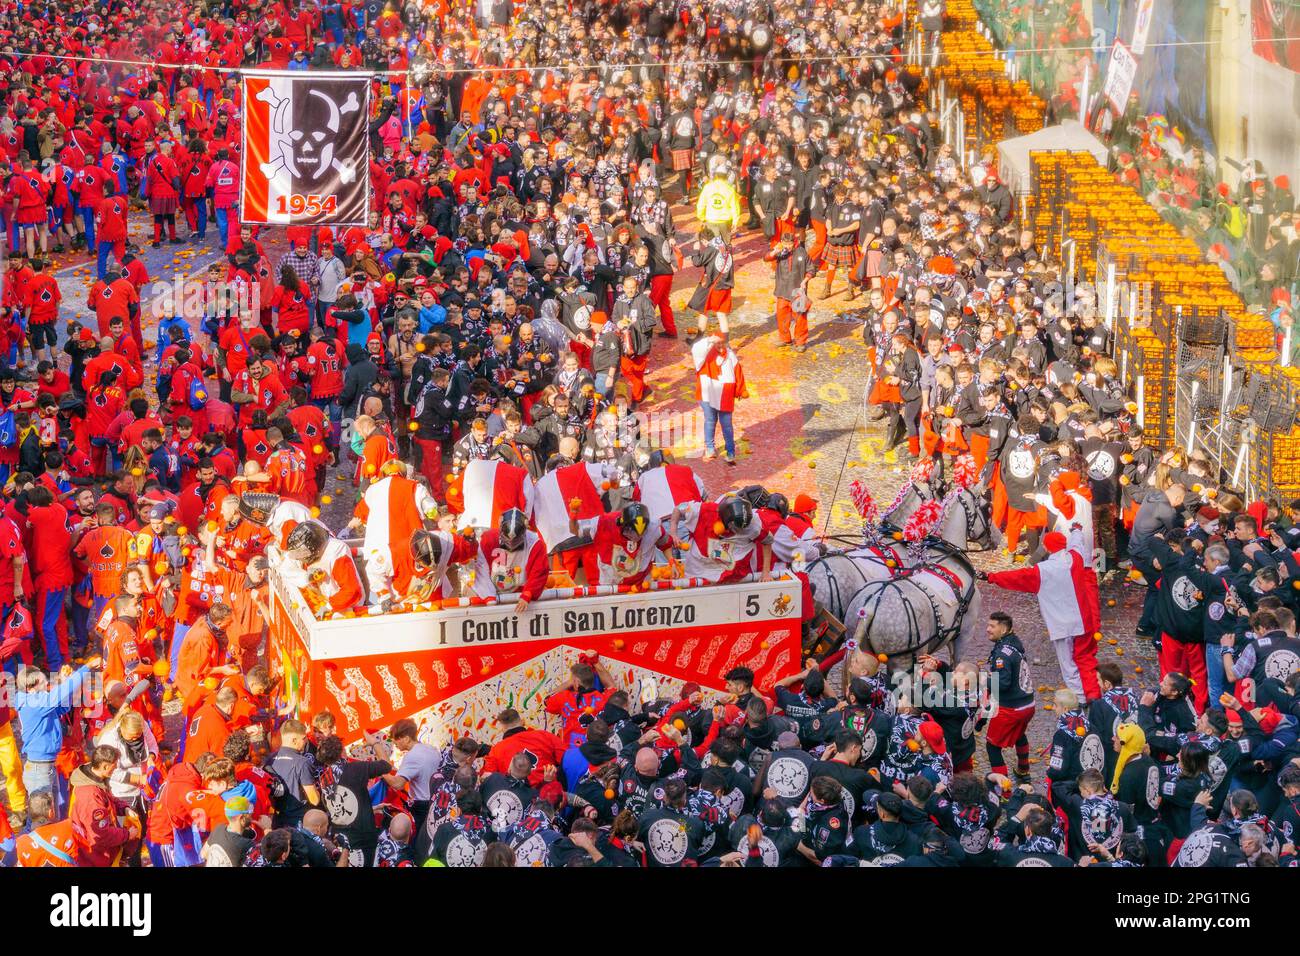 Ivrea, Italy - February 19, 2023: Battle of the Oranges scene of the town square (Piazza di Citta), with fighters and crowd, part of the historical ca Stock Photo